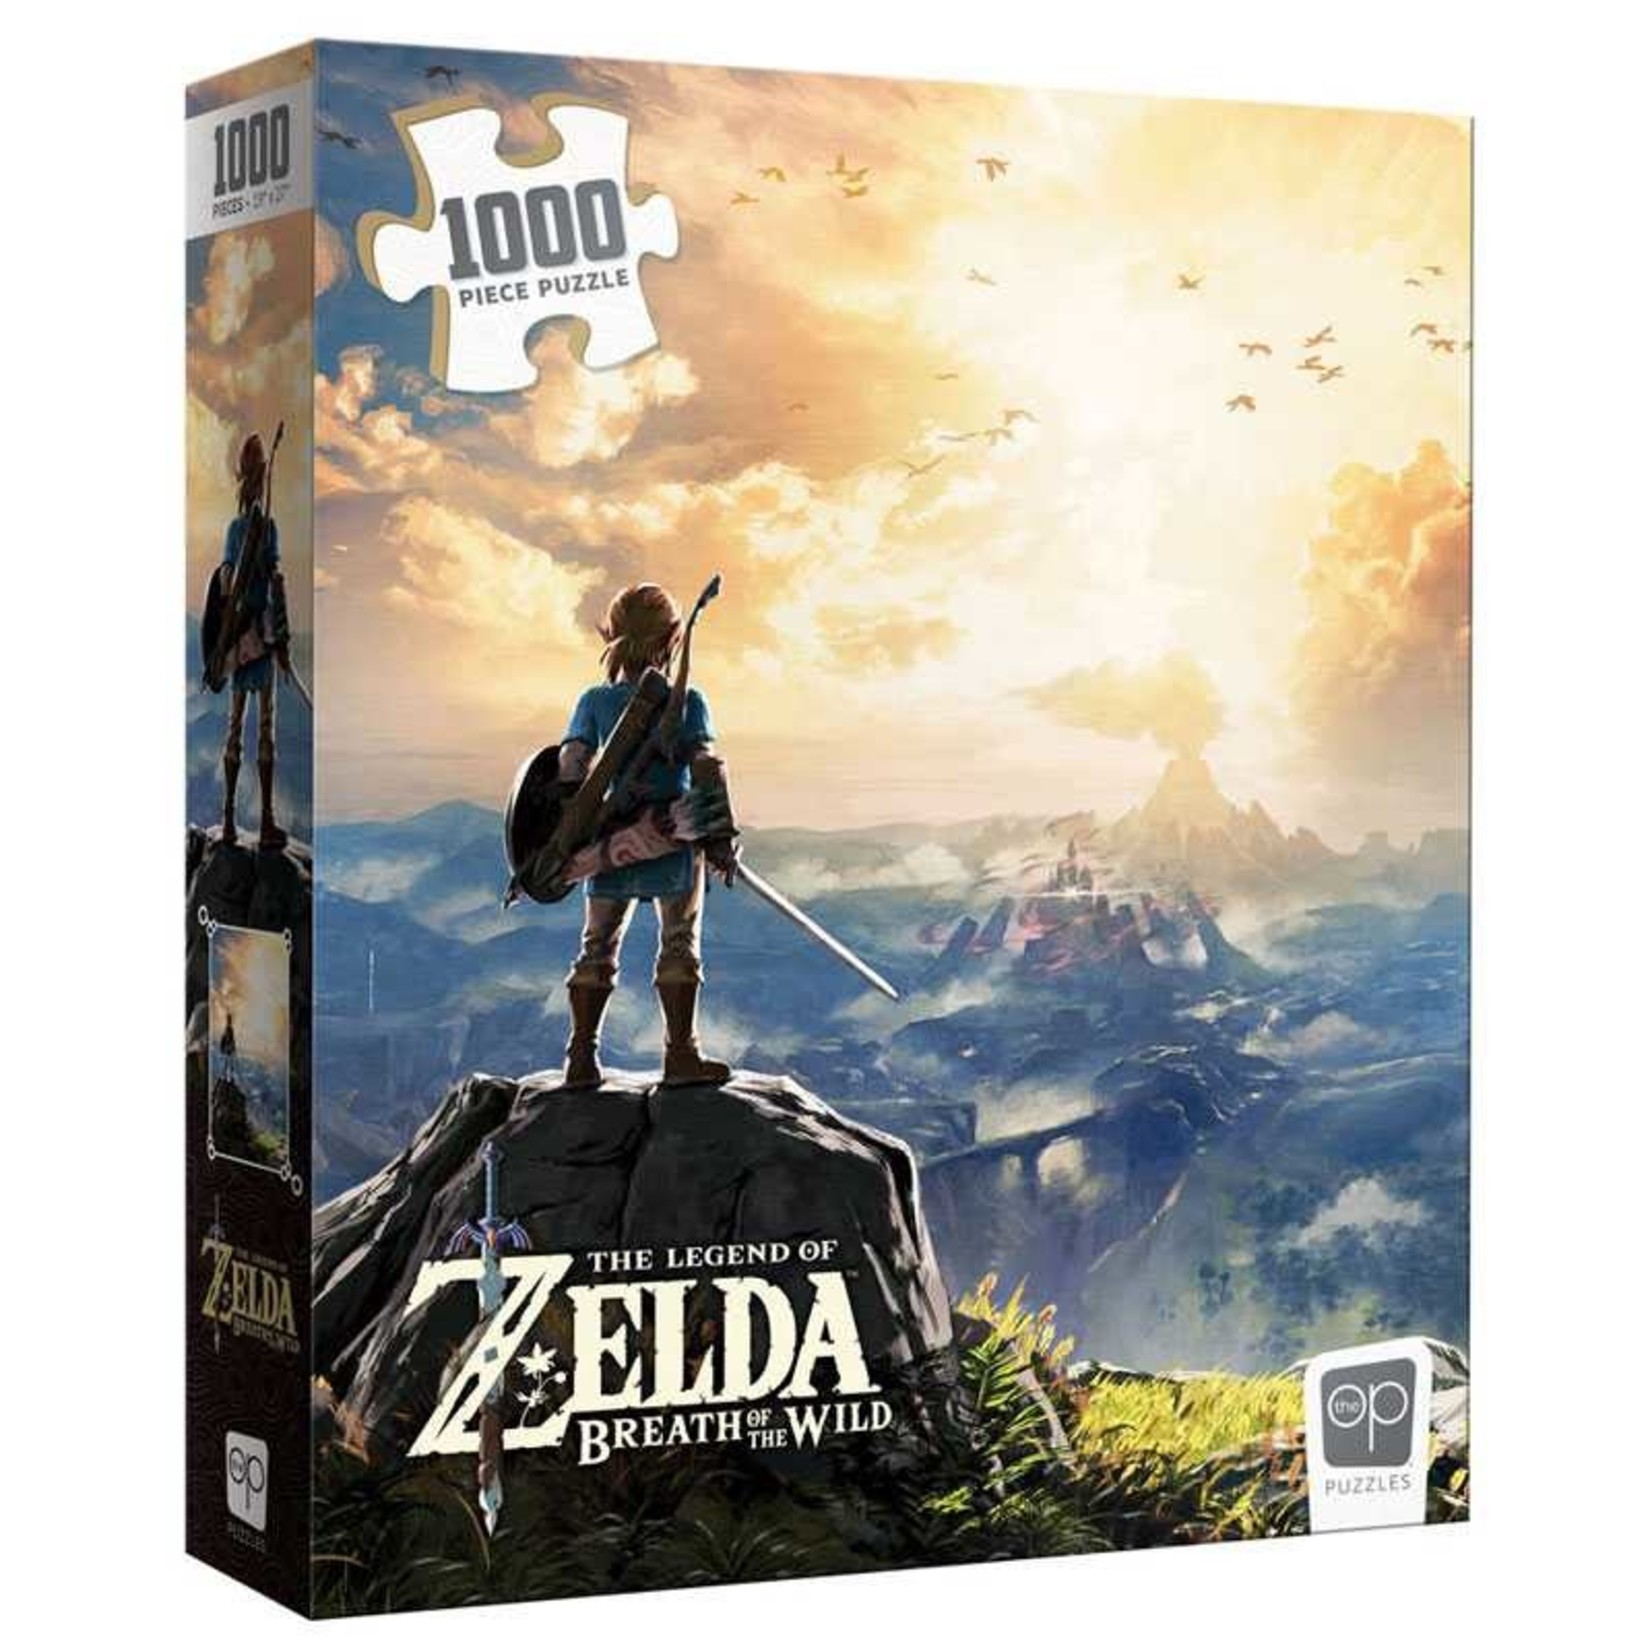 USAopoly 1000 pc Puzzle Zelda Breath of the Wild